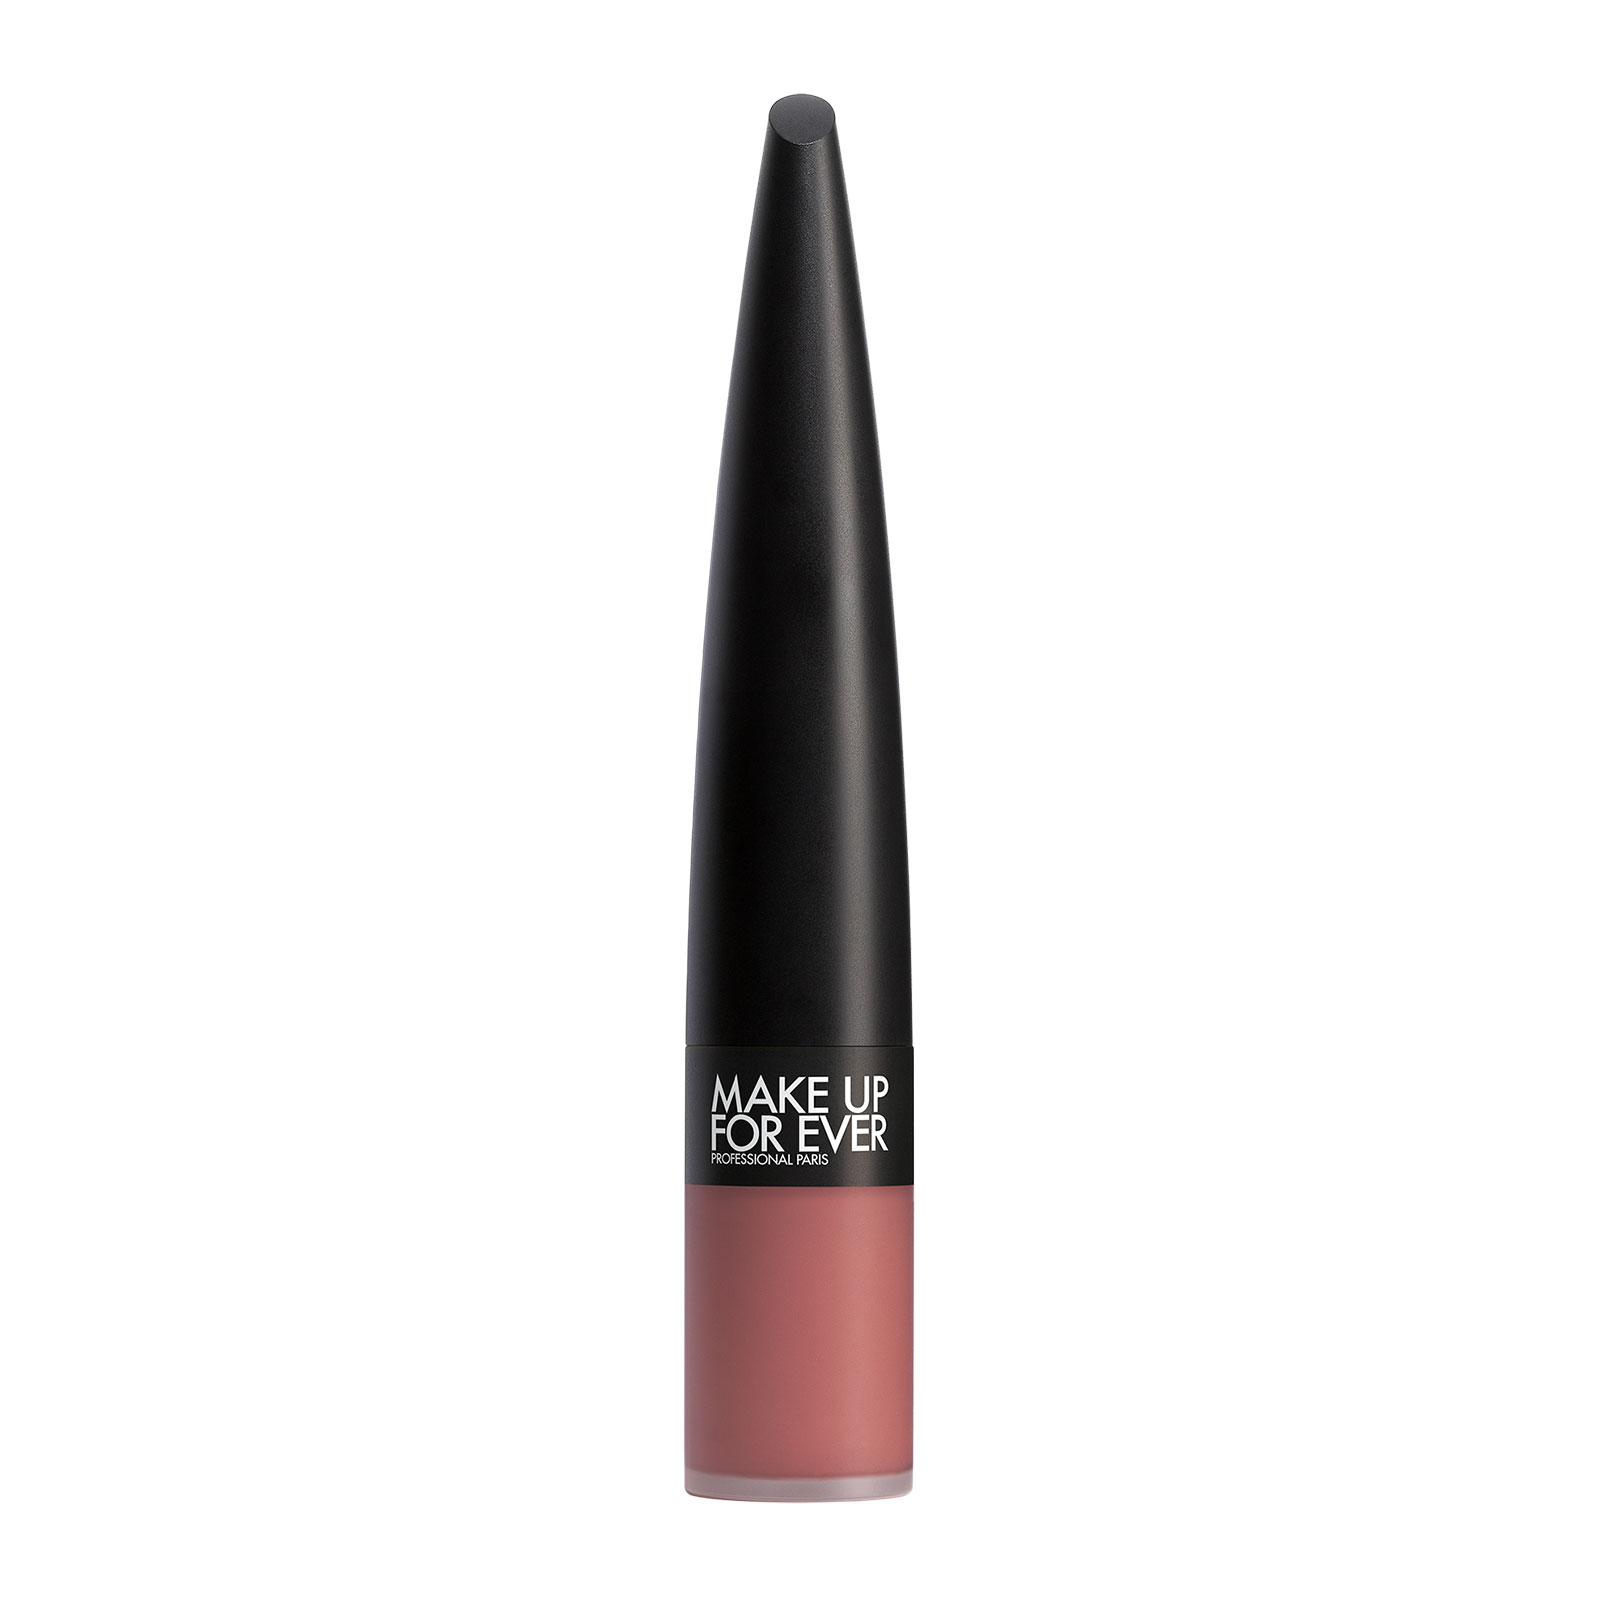 Make Up For Ever Rouge Artist For Ever Matte - Power Last Liquid Lipstick 240 Rose Now And Always 4.